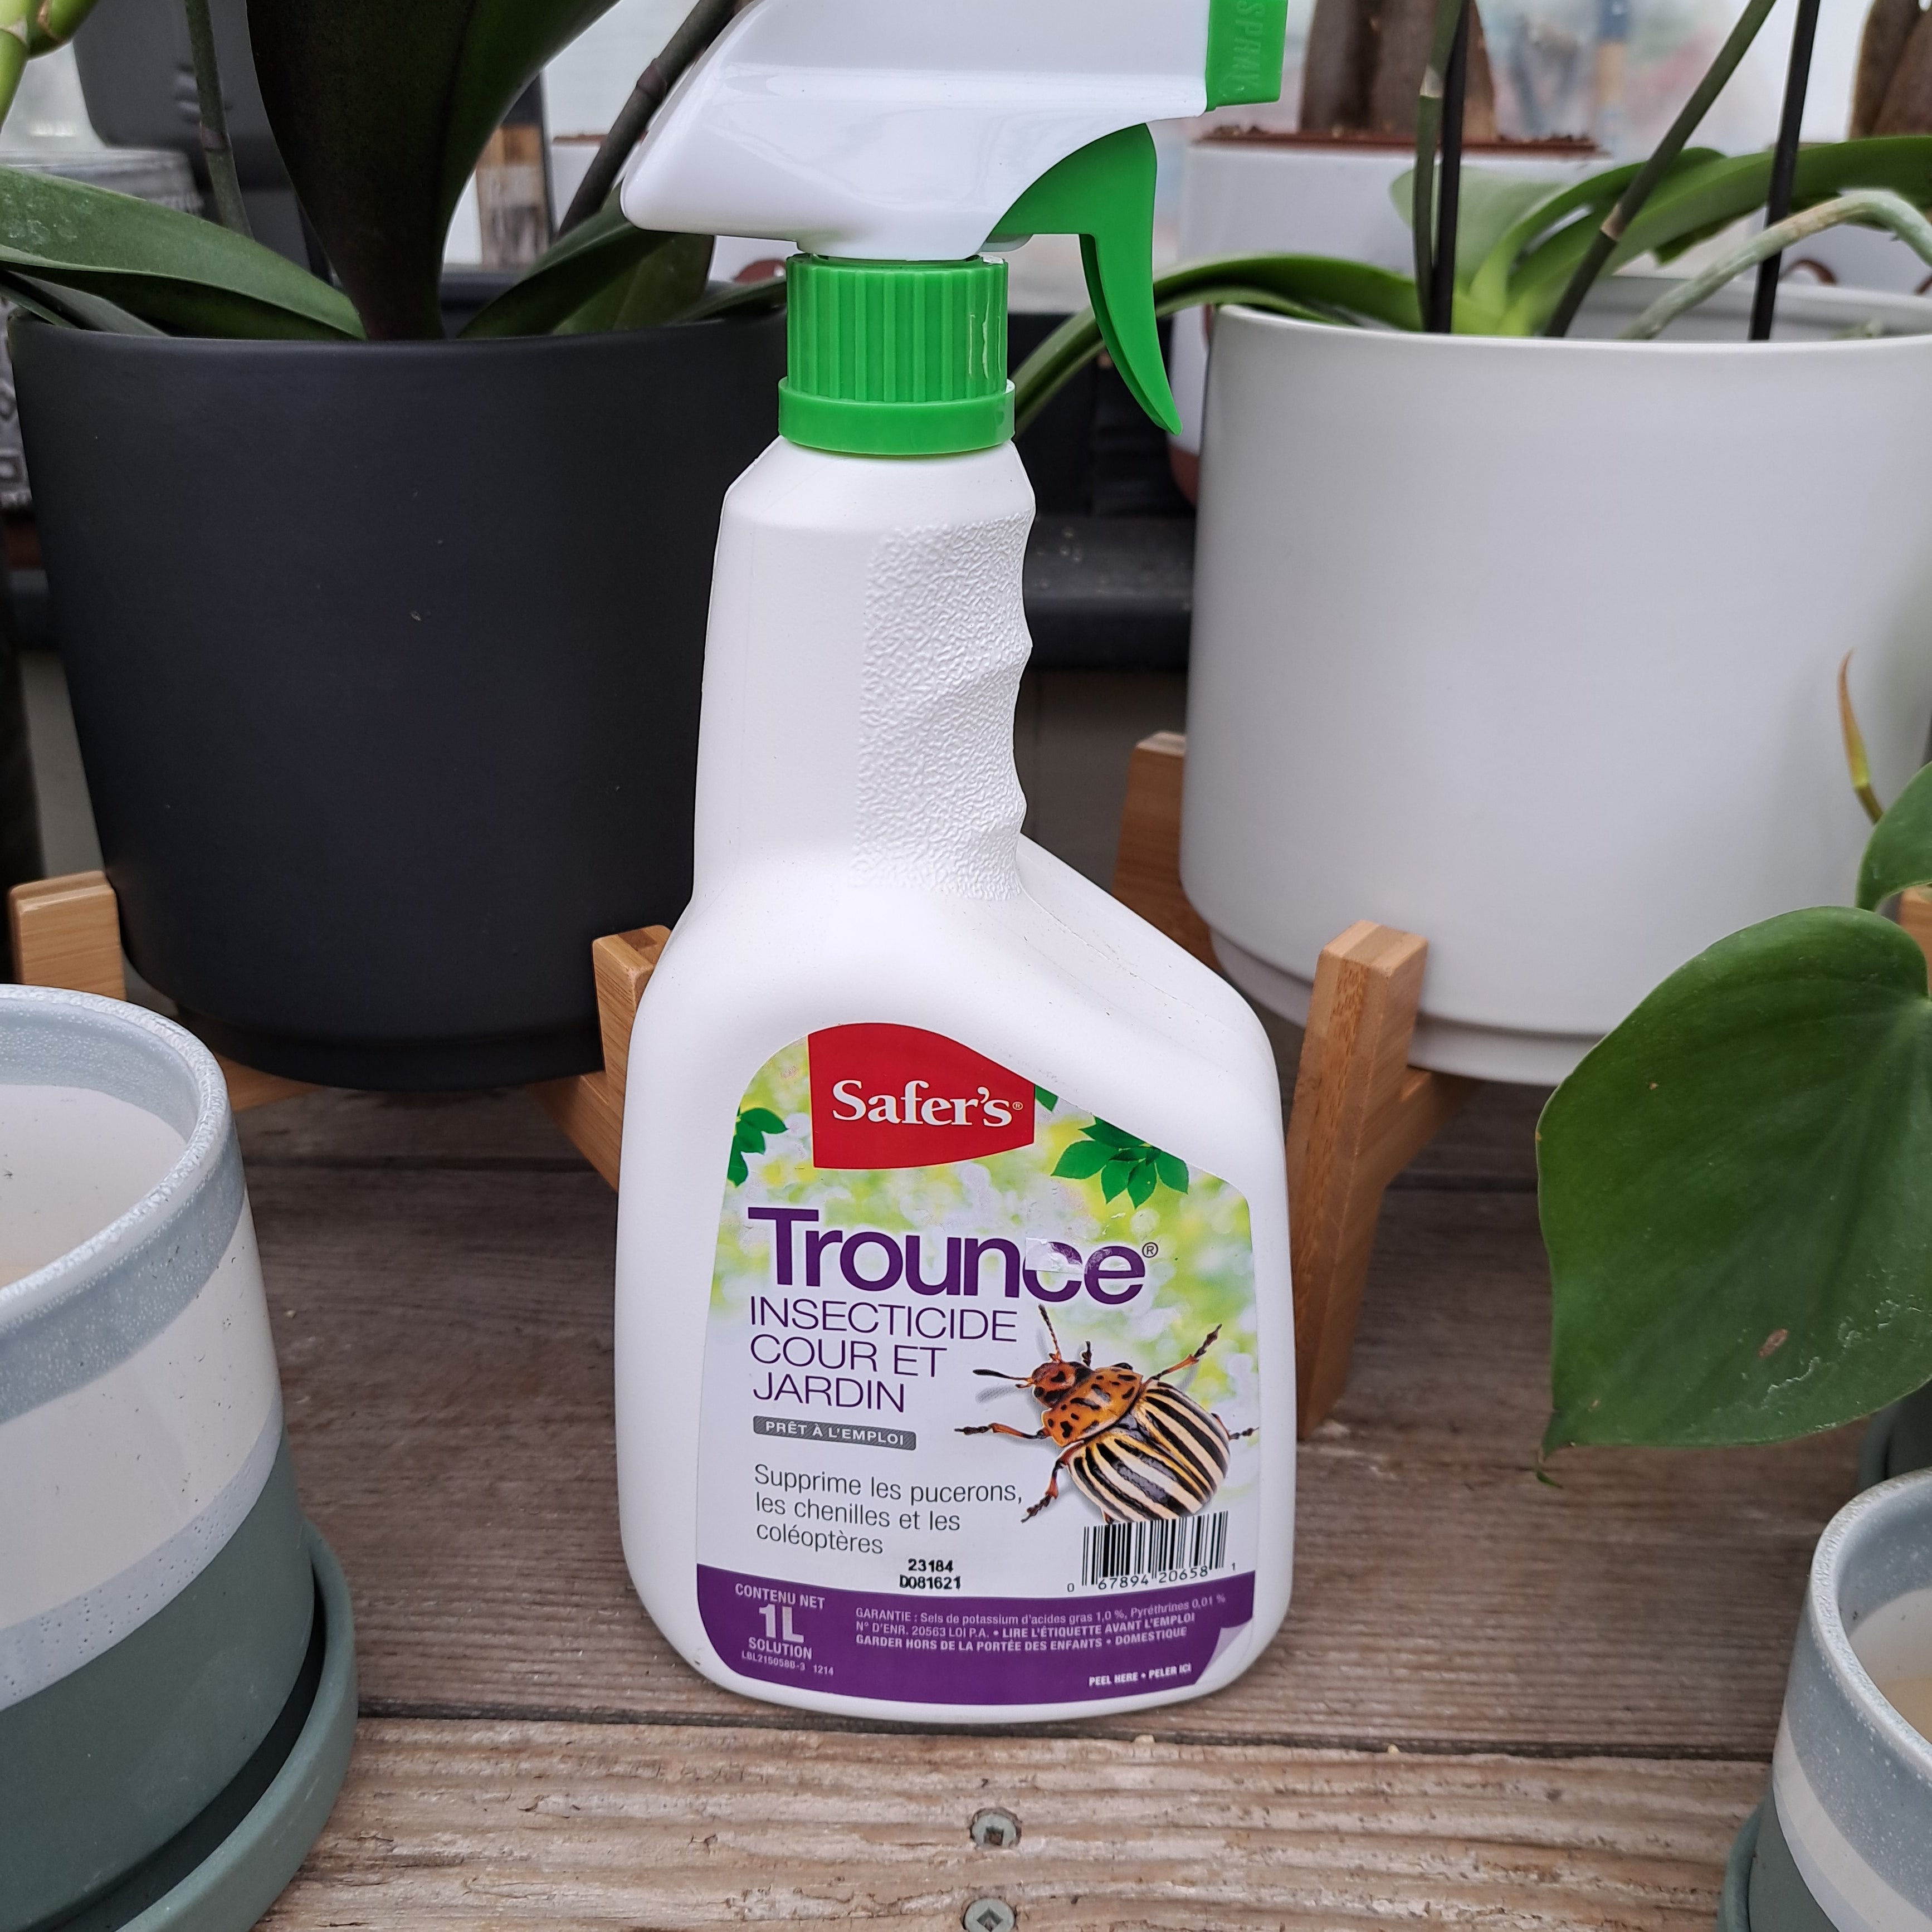 Trounce insecticide yard and garden 1 liter